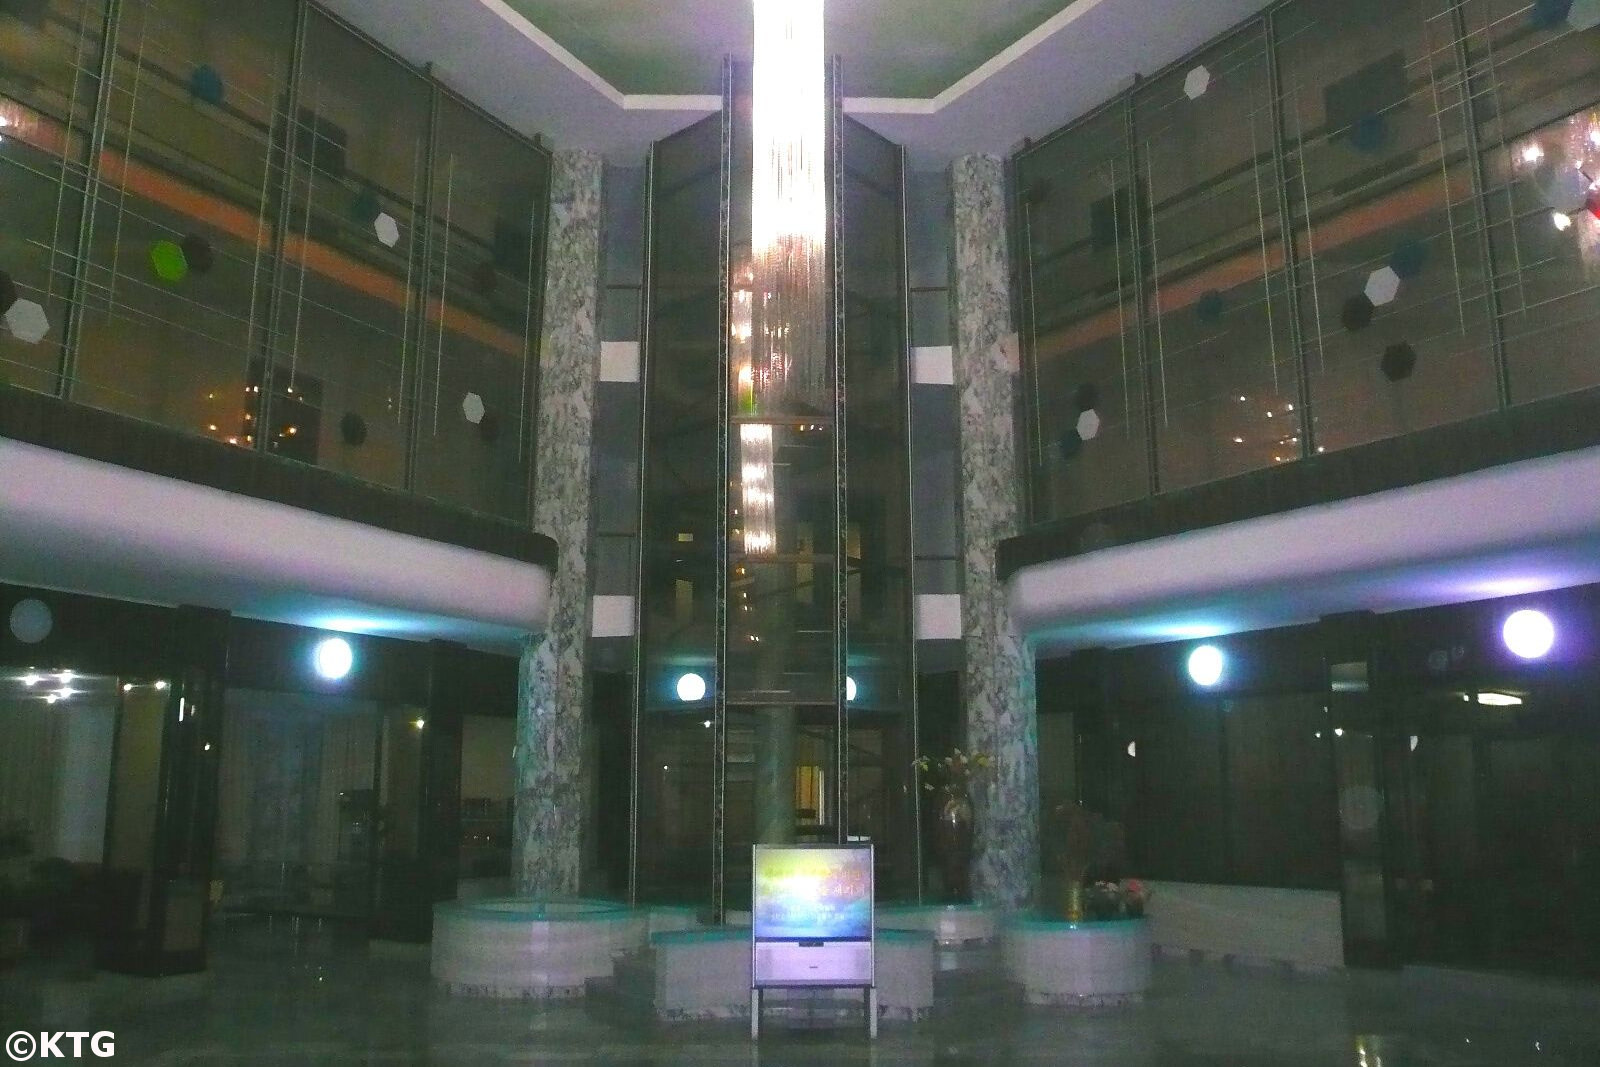 Lobby of the Dongmyong Hotel as spelled Tongmyong Hotel in Wonsan city, Kangwon province, North Korea (DPRK). Trip arranged by KTG Tours